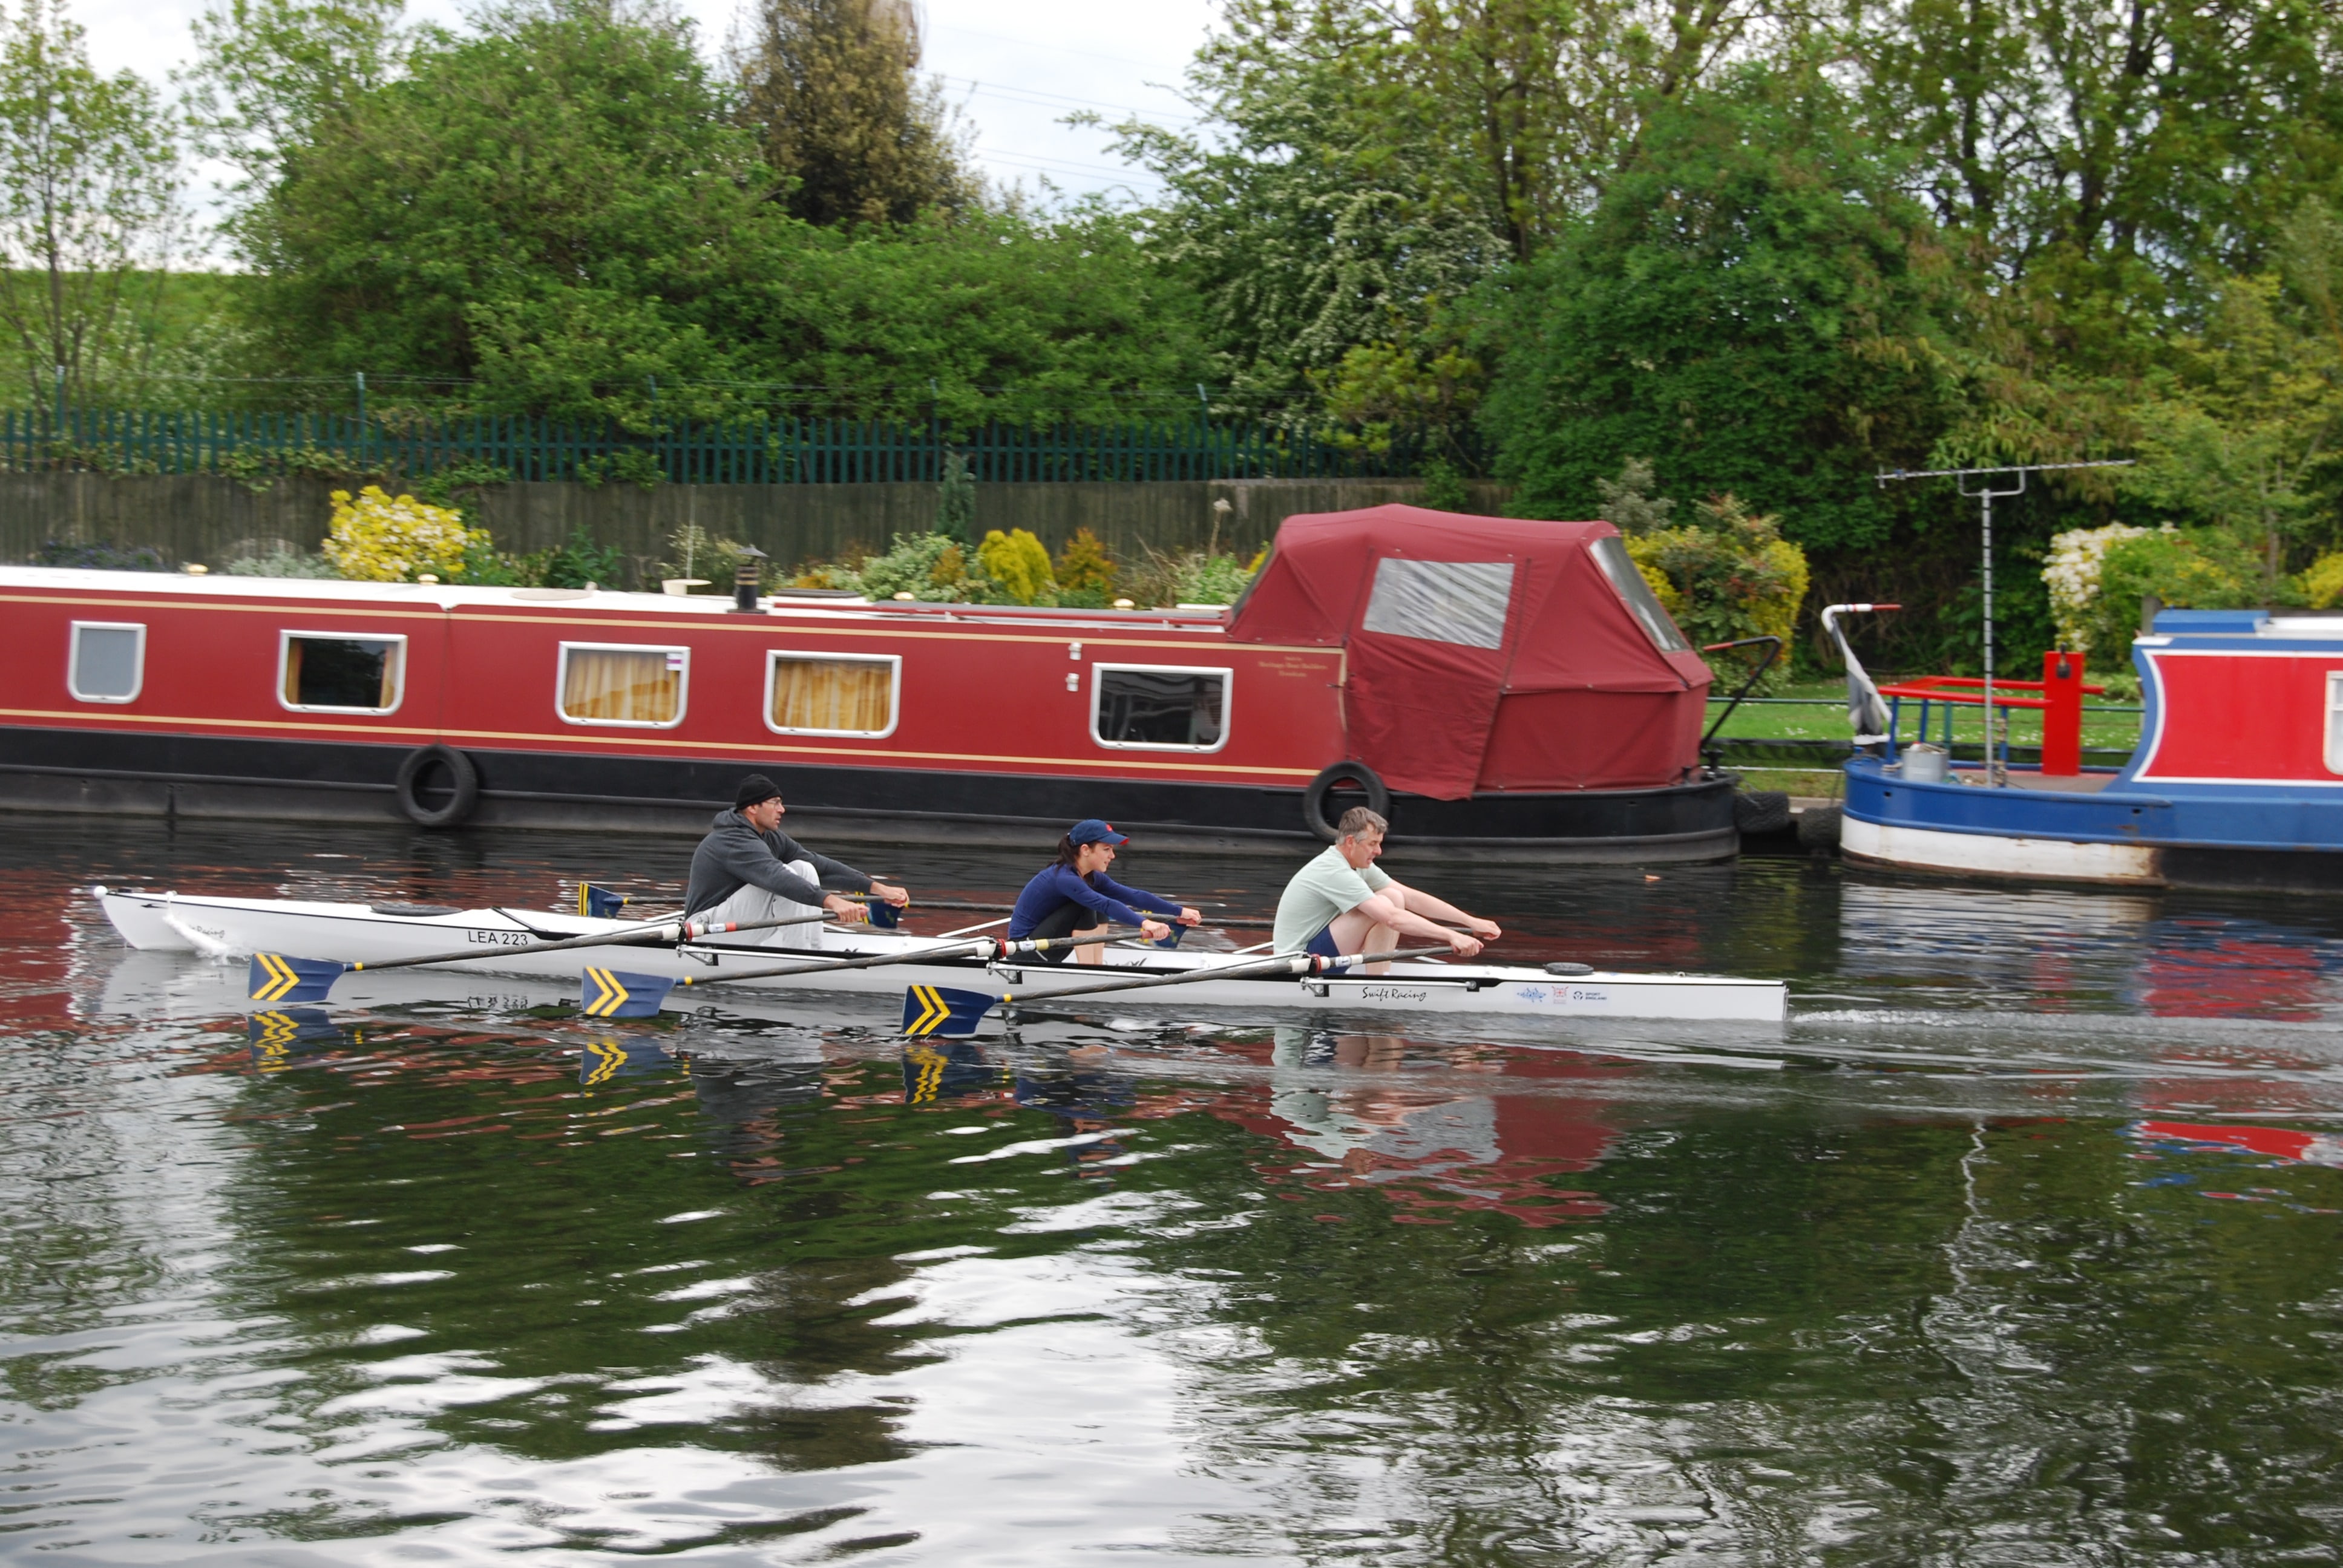 Recreational And Touring Boats Swift Freedom Rowing Centre Uk 9130